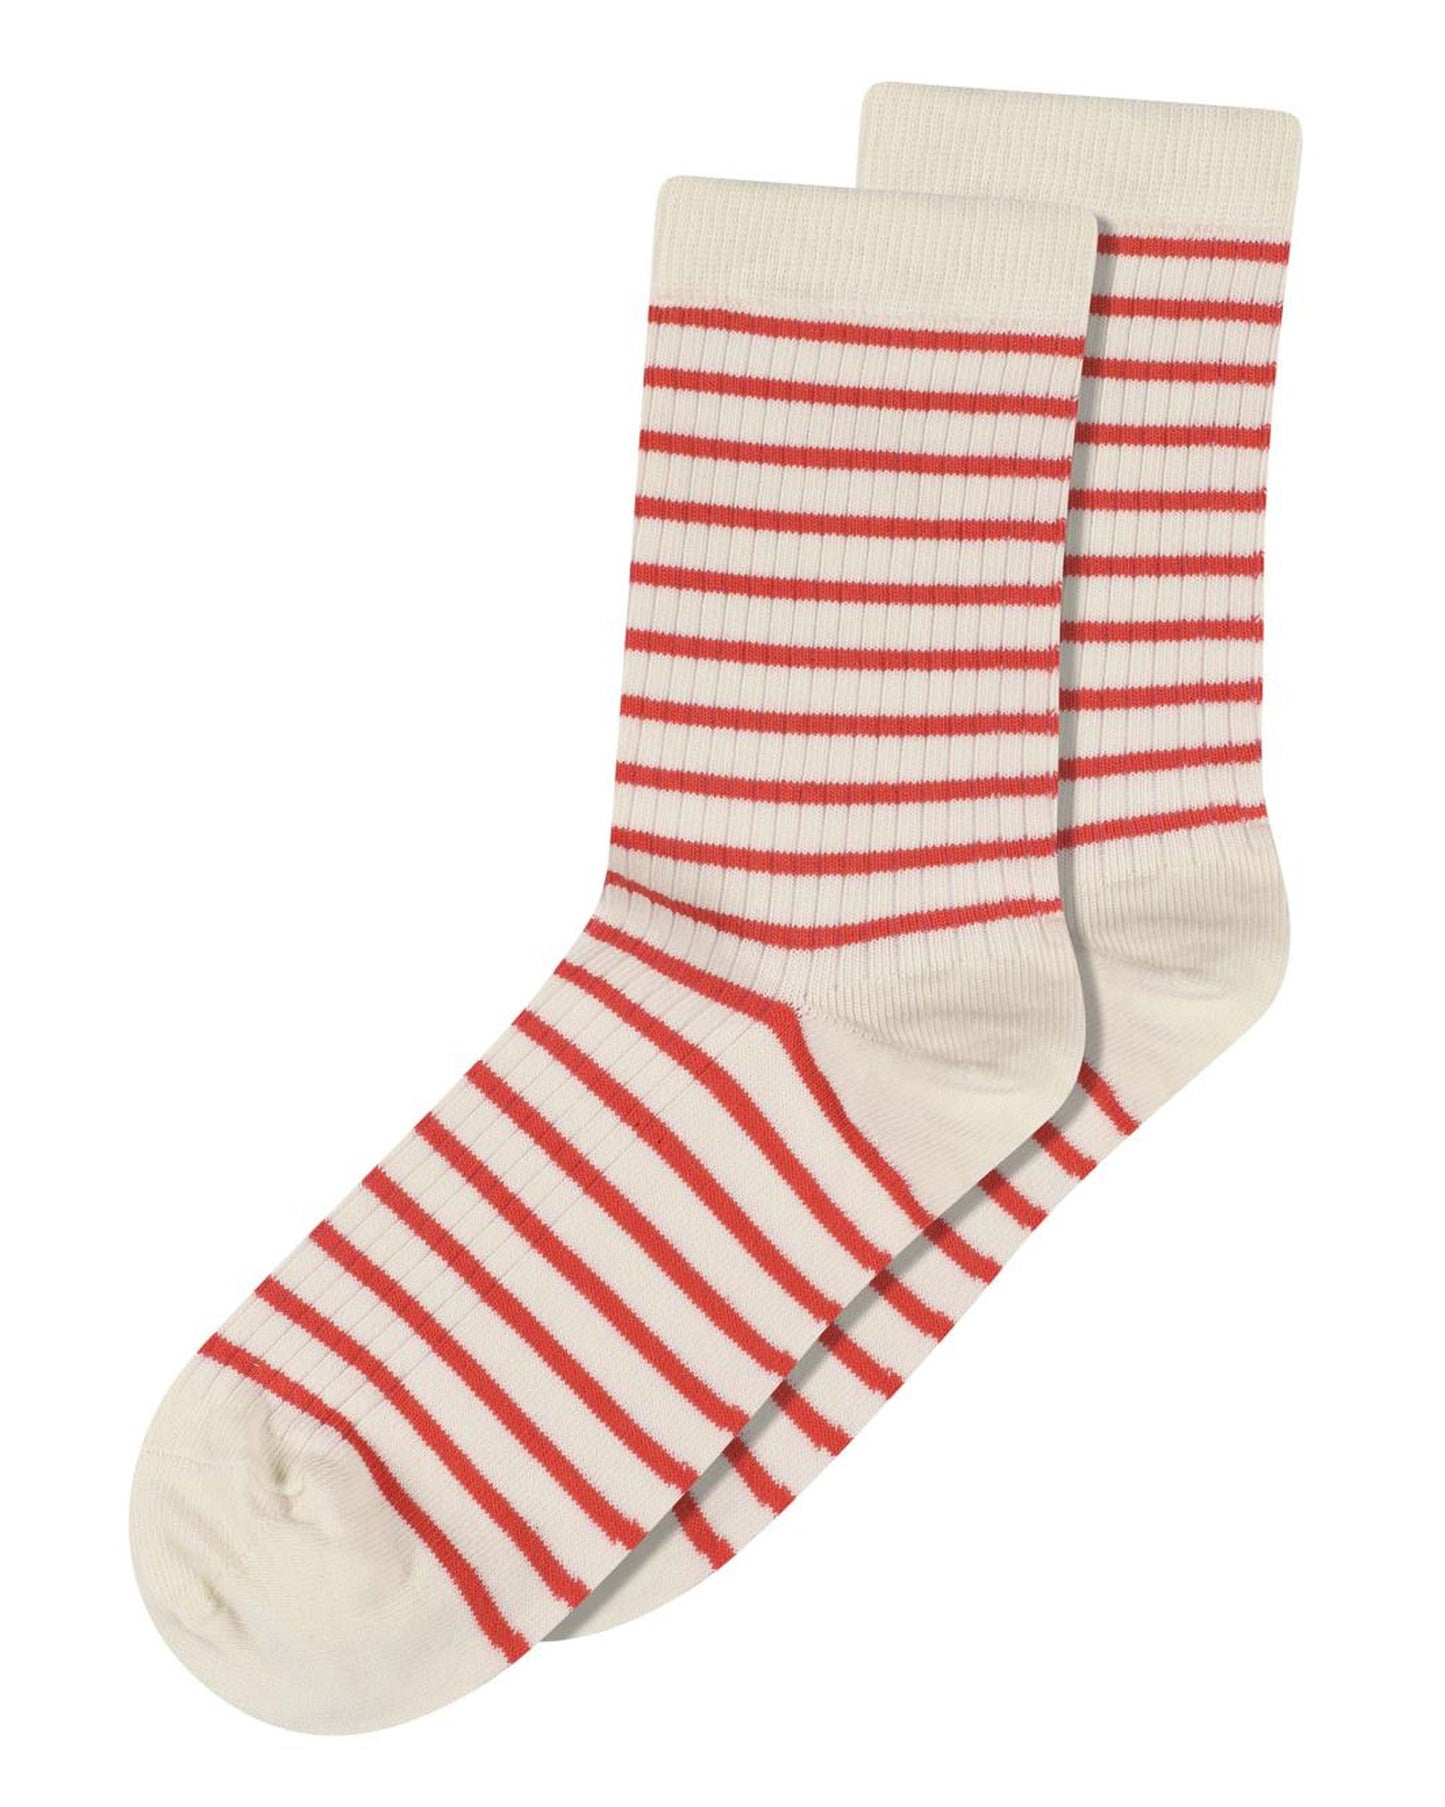 MP Denmark 77715 Lydia Sock - Cream crew length ribbed cotton ankle socks with a thin bright red horizontal stripe pattern.